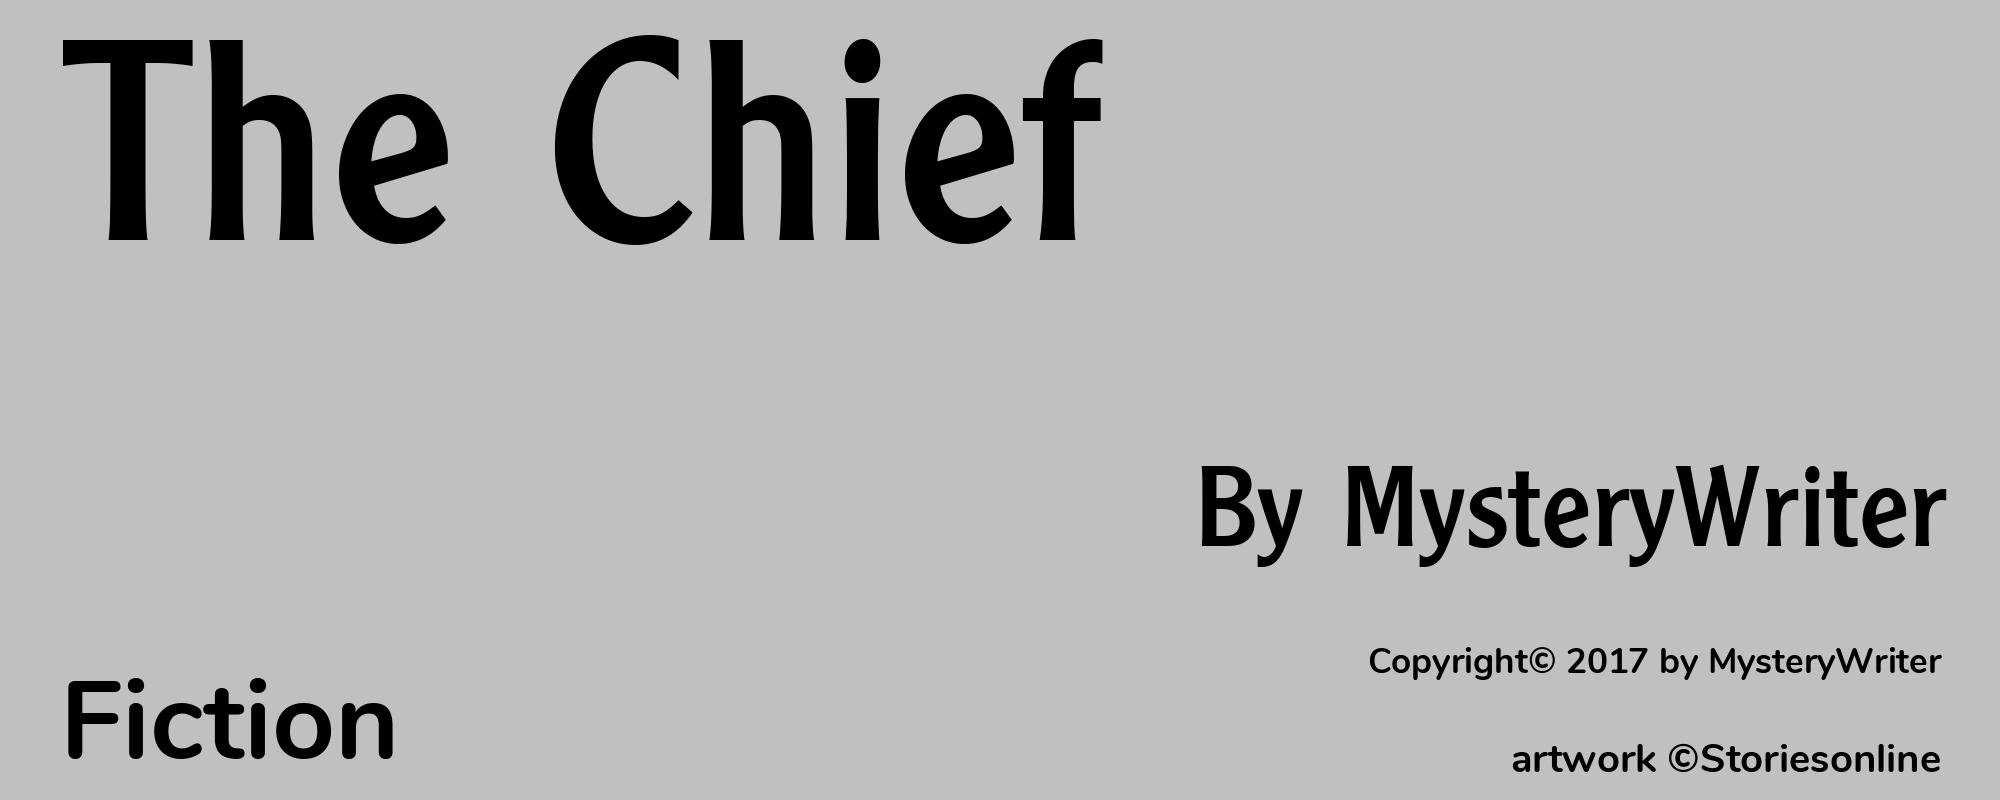 The Chief - Cover